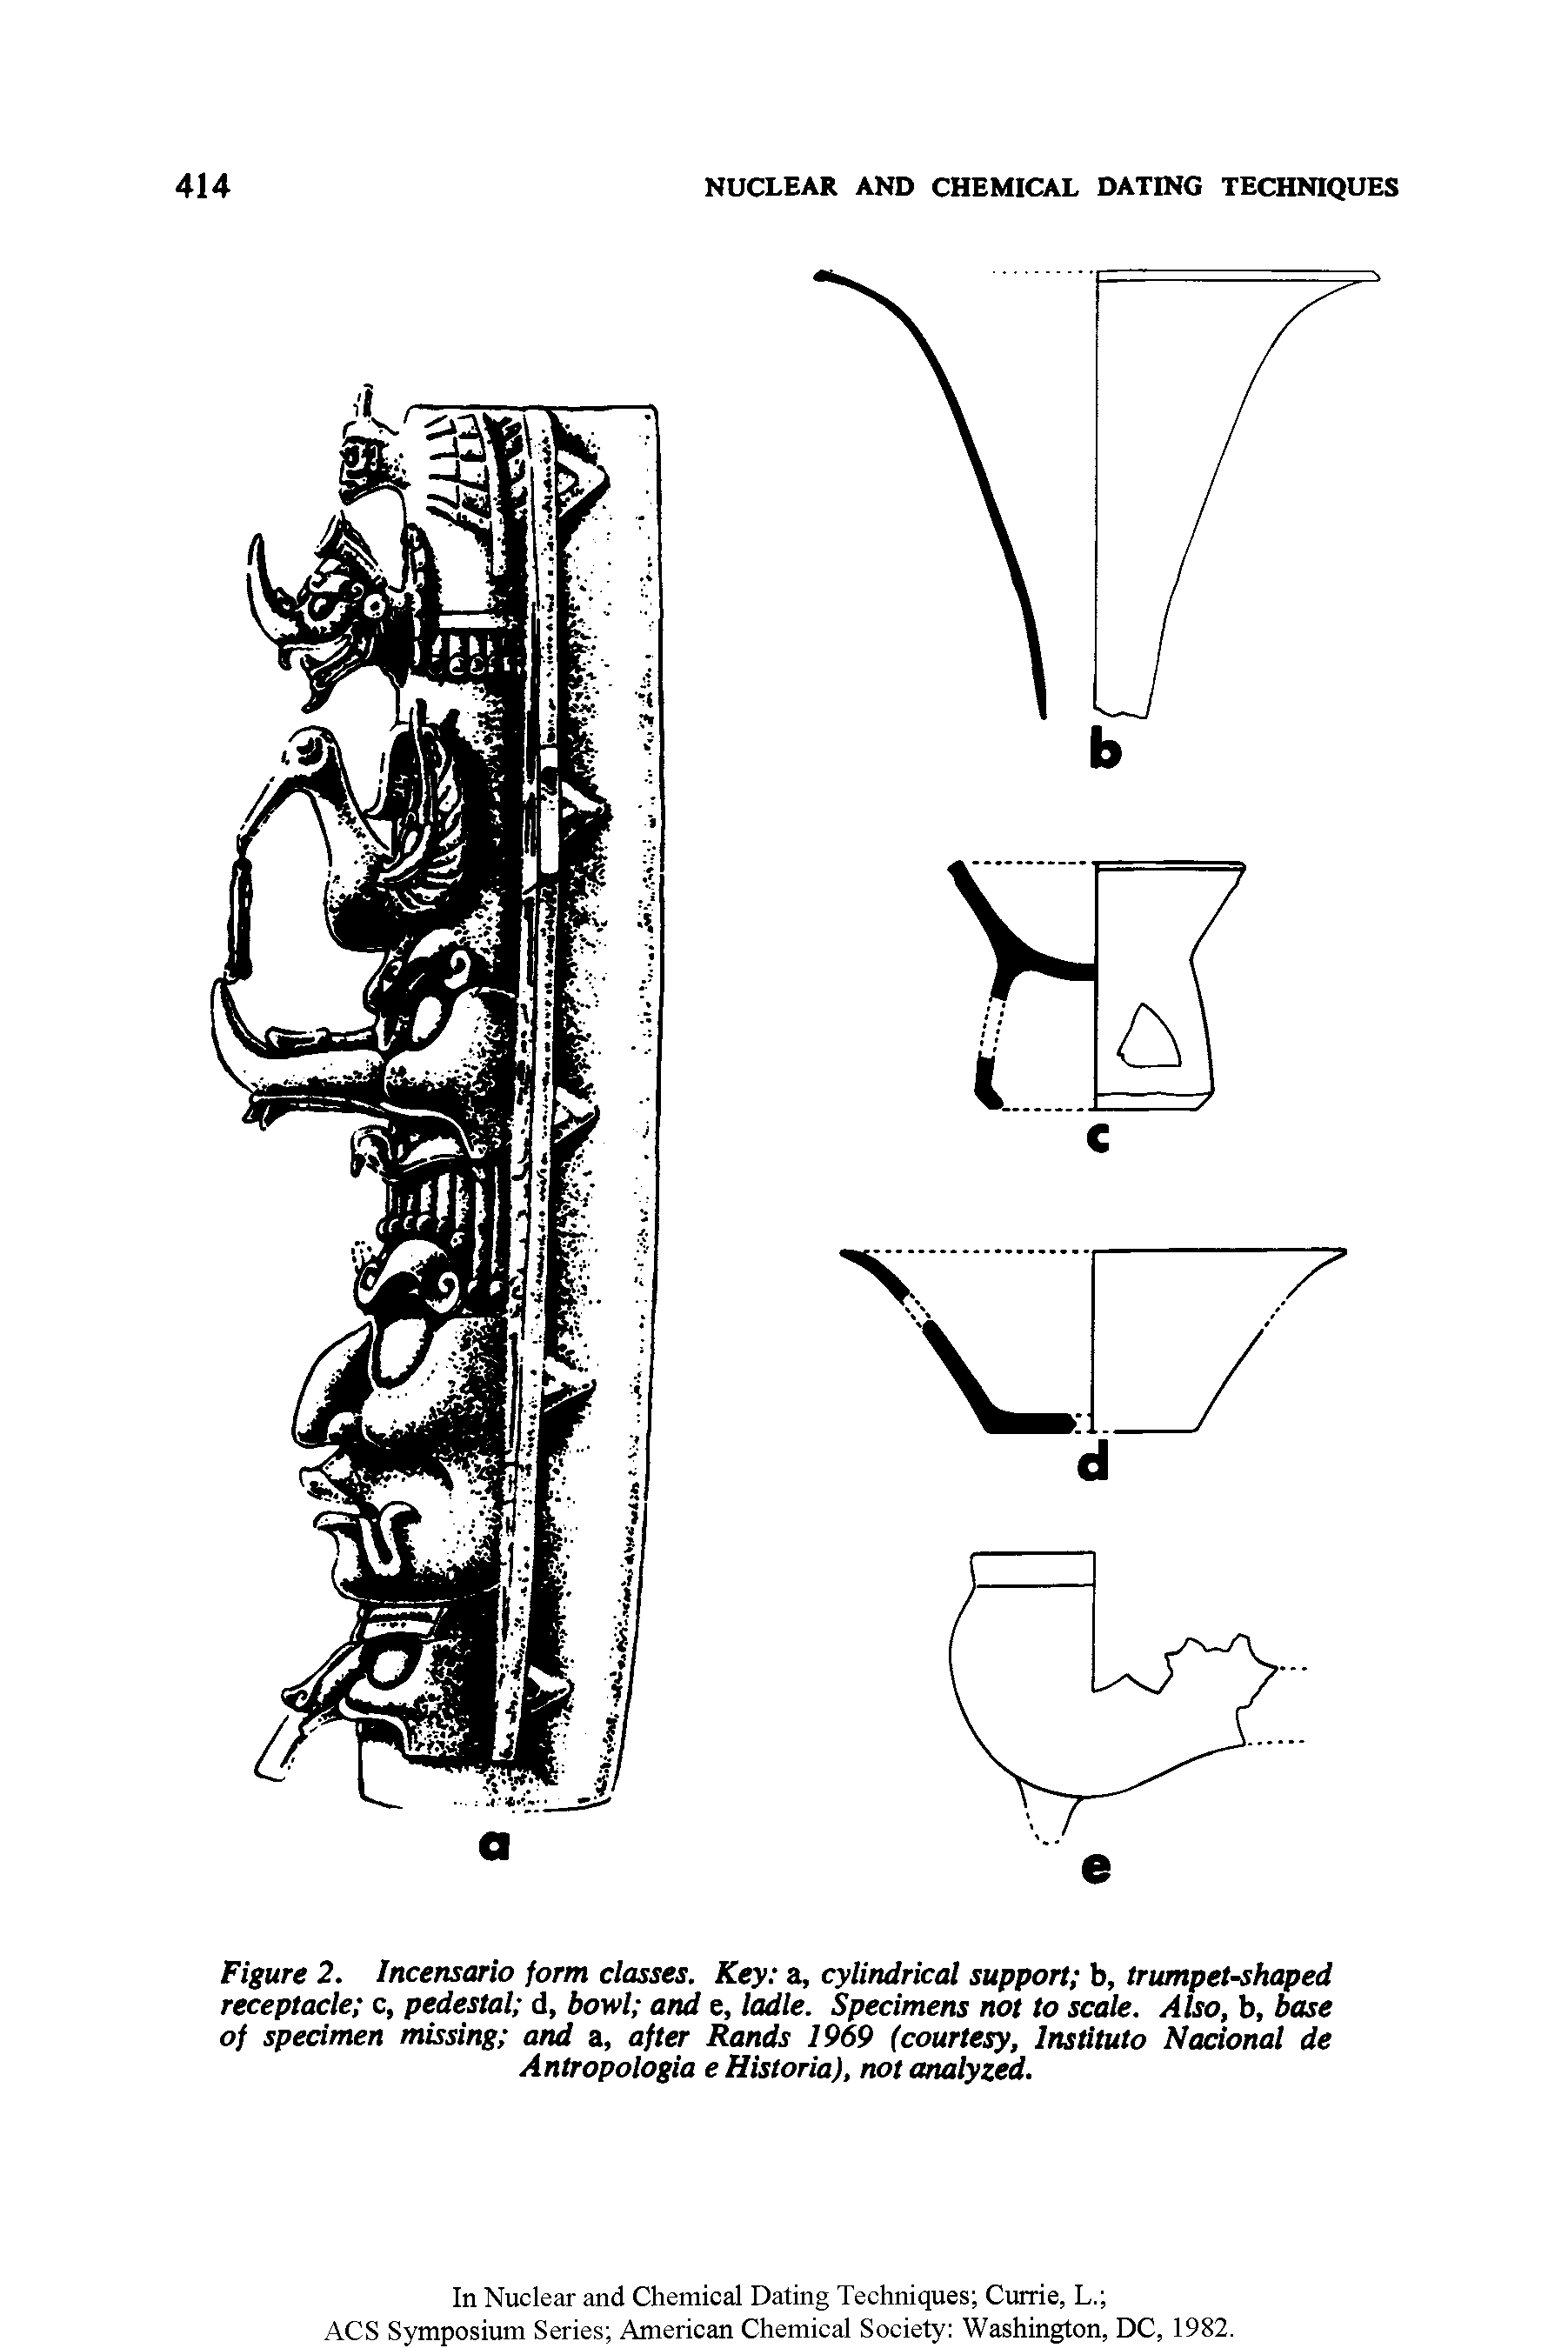 Figure 2. Incensario form classes. Key a, cylindrical support b, trumpet-shaped receptacle c, pedestal d, bowl and e, ladle. Specimens not to scale. Also, b, base of specimen missing and a, after Rands 1969 (courtesy, Instituto Nacional de Antropologia e Historia), not analyzed.